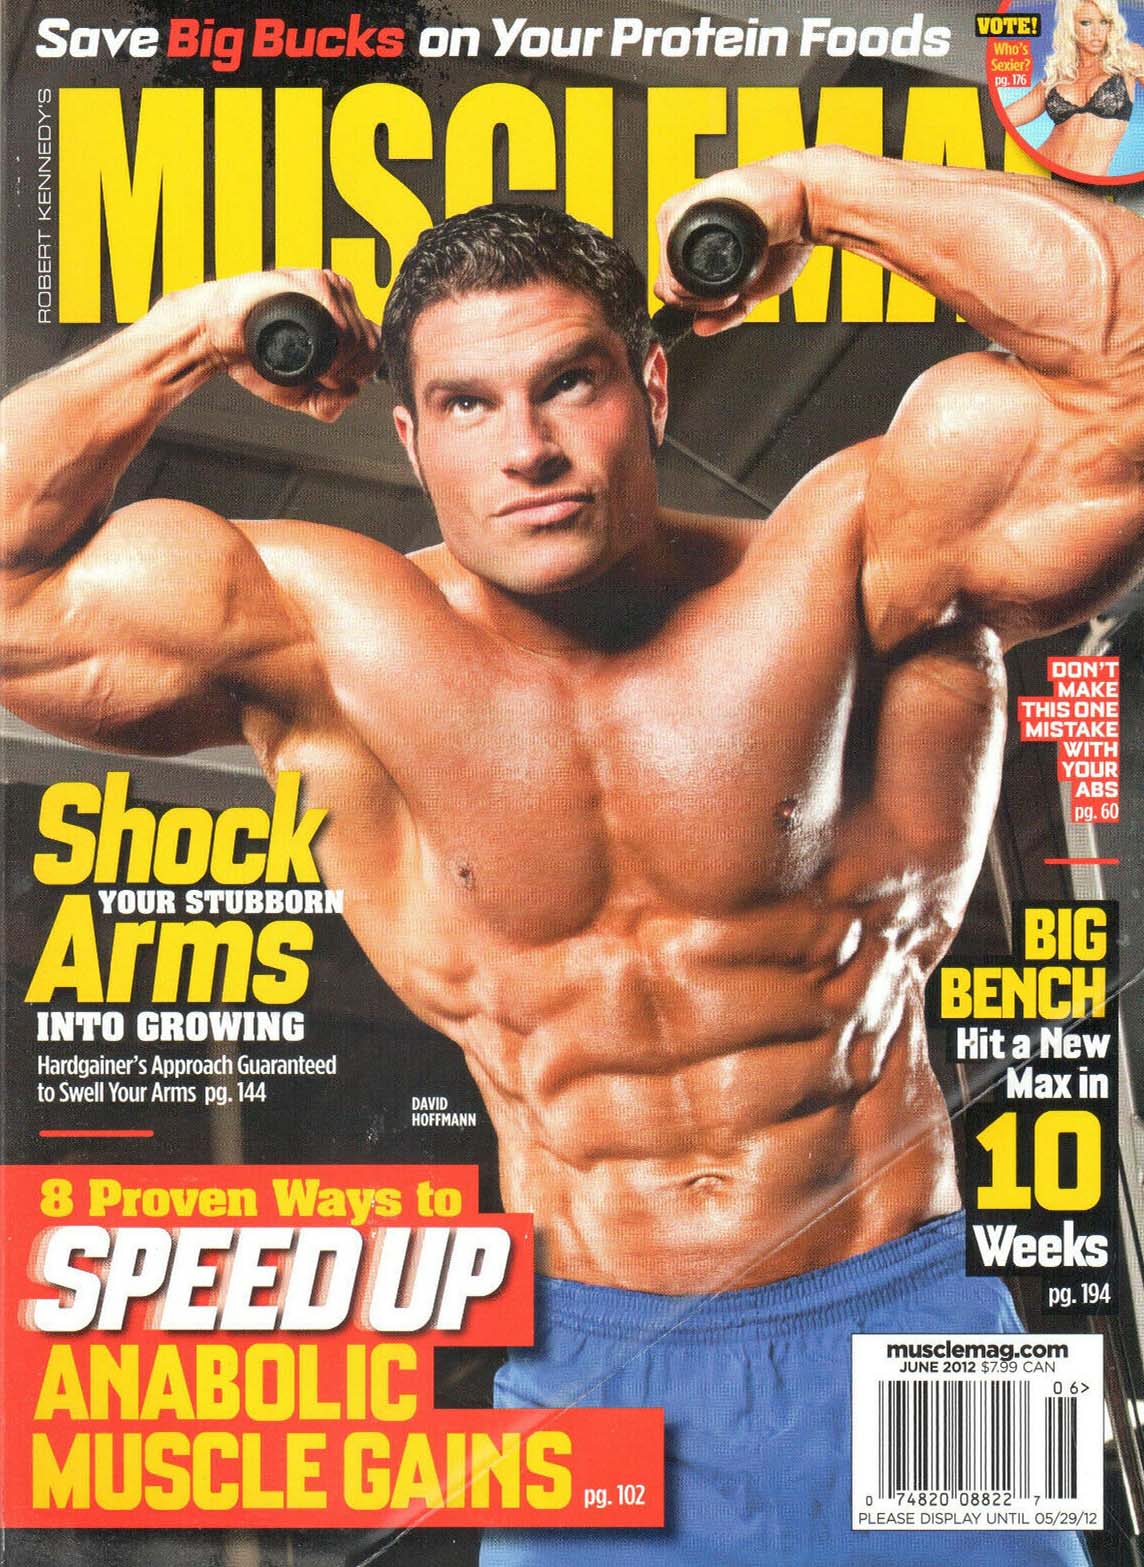 Muscle Mag June 2012 magazine back issue Muscle Mag magizine back copy Muscle Mag June 2012 Bodybuilding and Fitness Magazine Back Issue Published by Canadian Robert Kennedy and Founded in 1974. Save Big Bucks On Your Protein Foods.